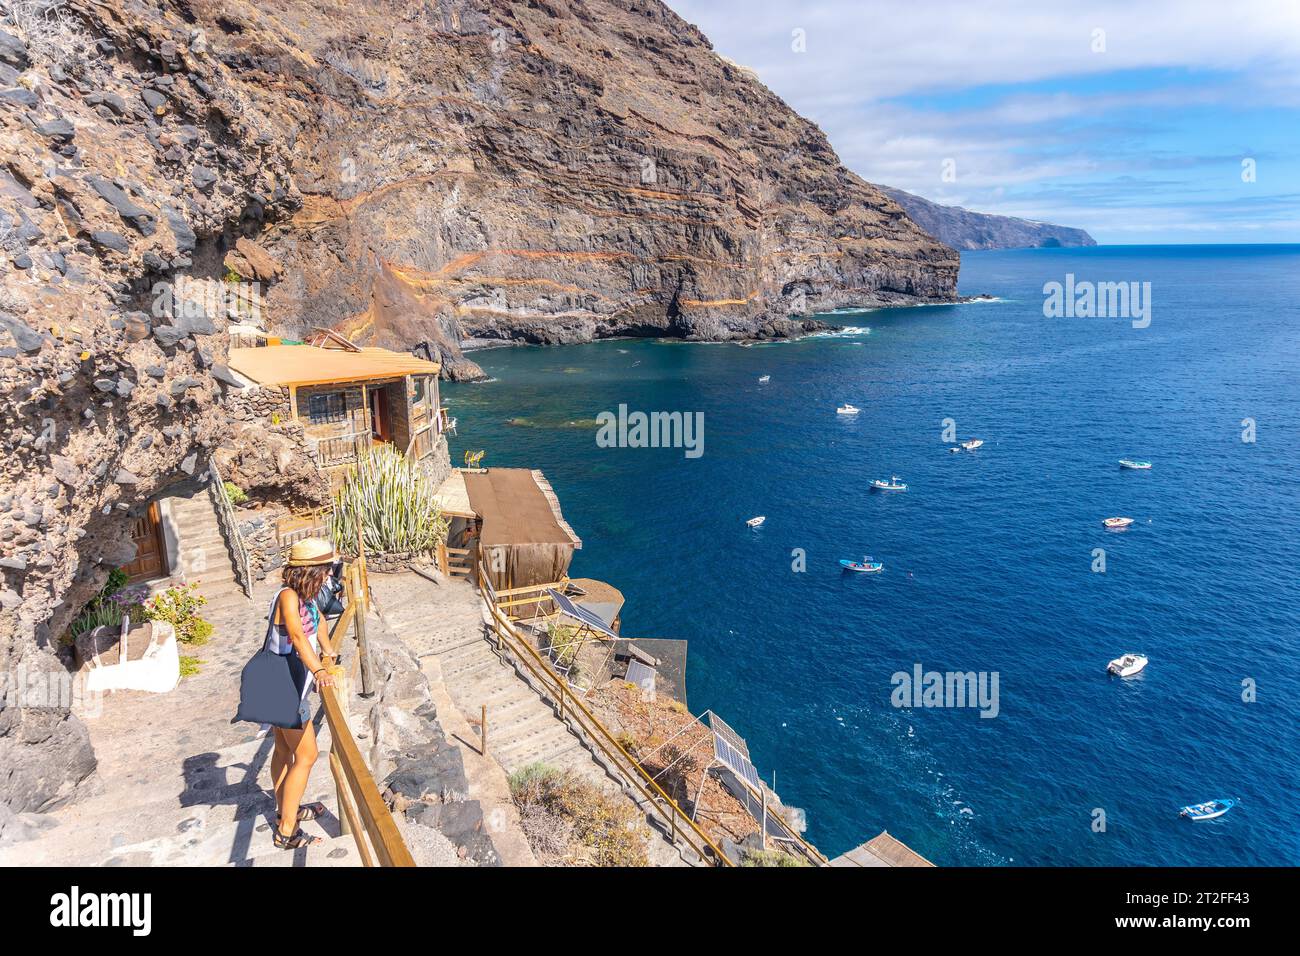 A young tourist in summer from the viewpoint looking and enjoying the cove of Puerto de Puntagorda, island of La Palma, Canary Islands. Spain Stock Photo